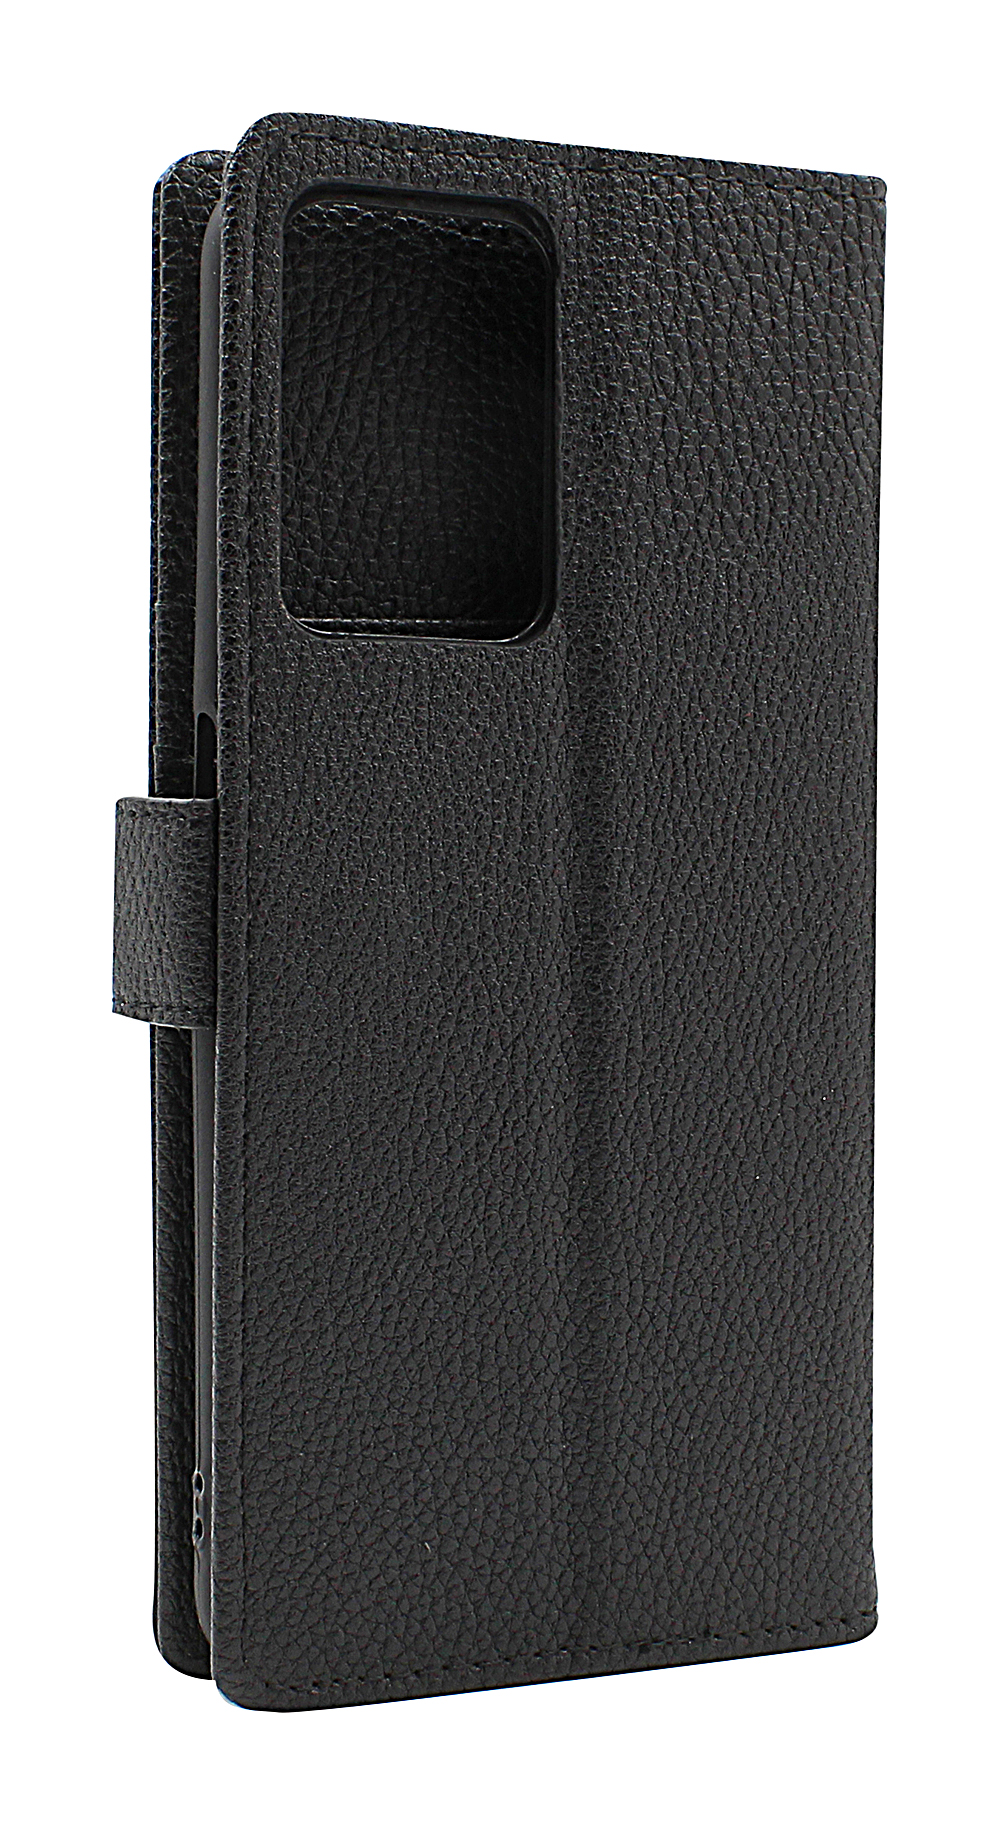 New Standcase Wallet OnePlus Nord CE 2 Lite 5G